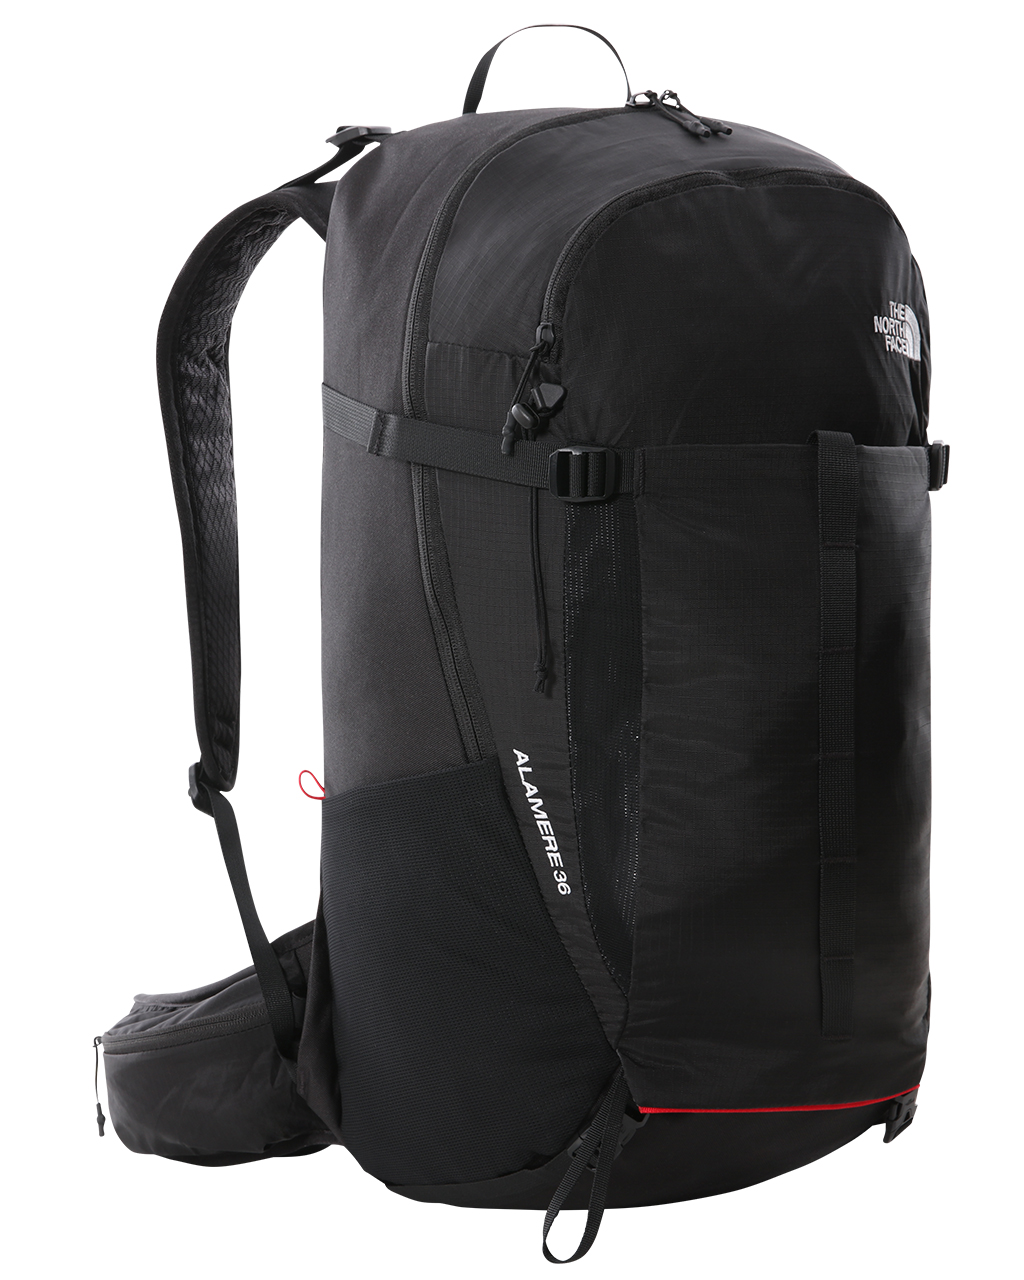 Oakley Kitchen Sink Backpack Review: Feature-Rich and Roomy